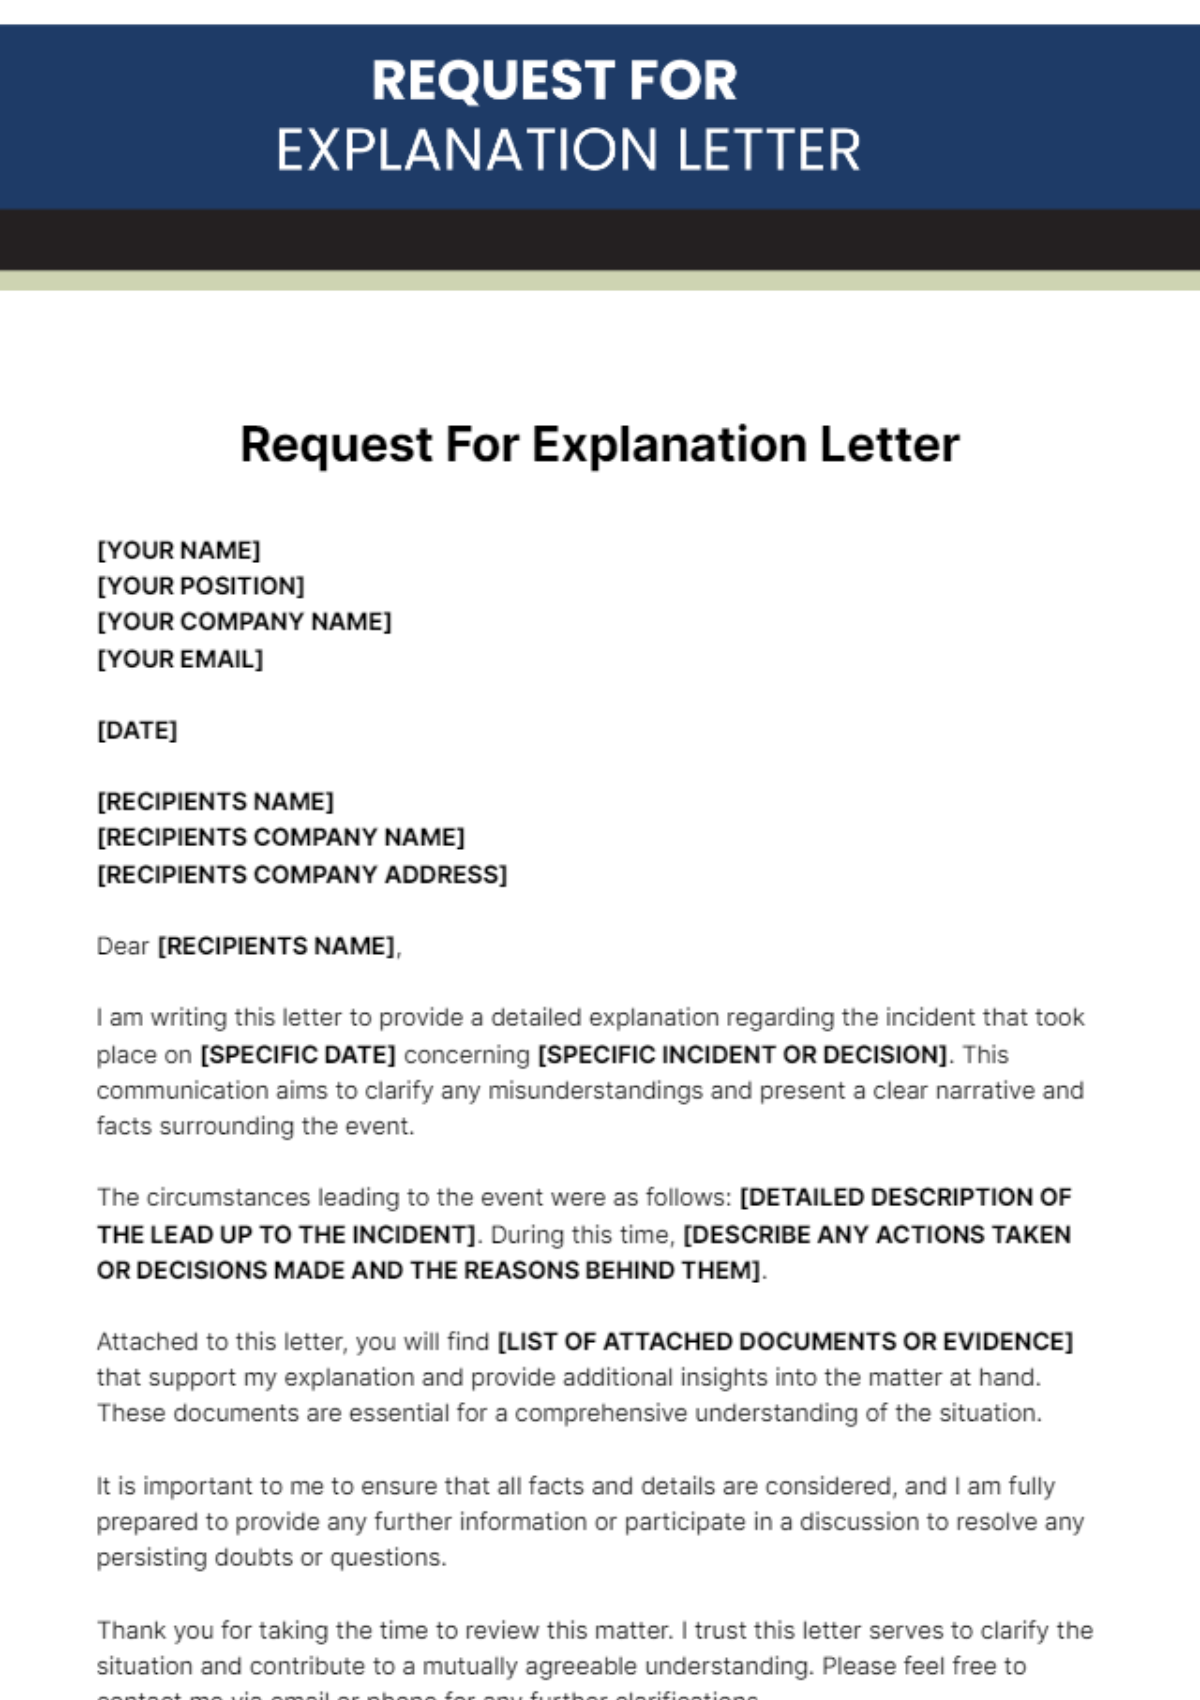 Request For Explanation Letter Template